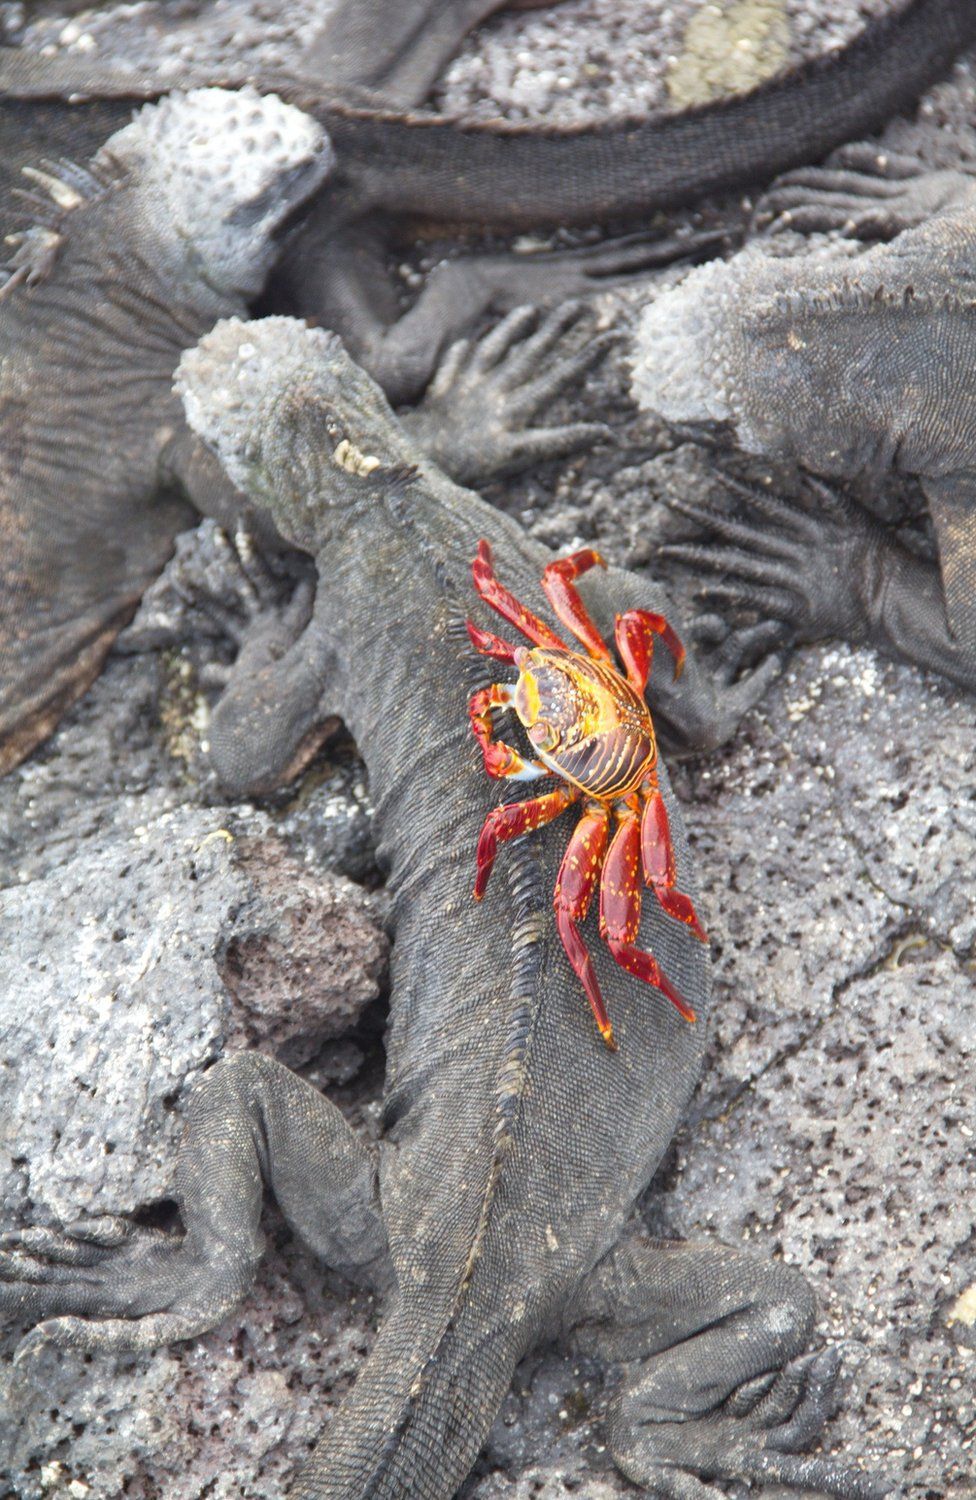 A crab catches a rid on an iguana